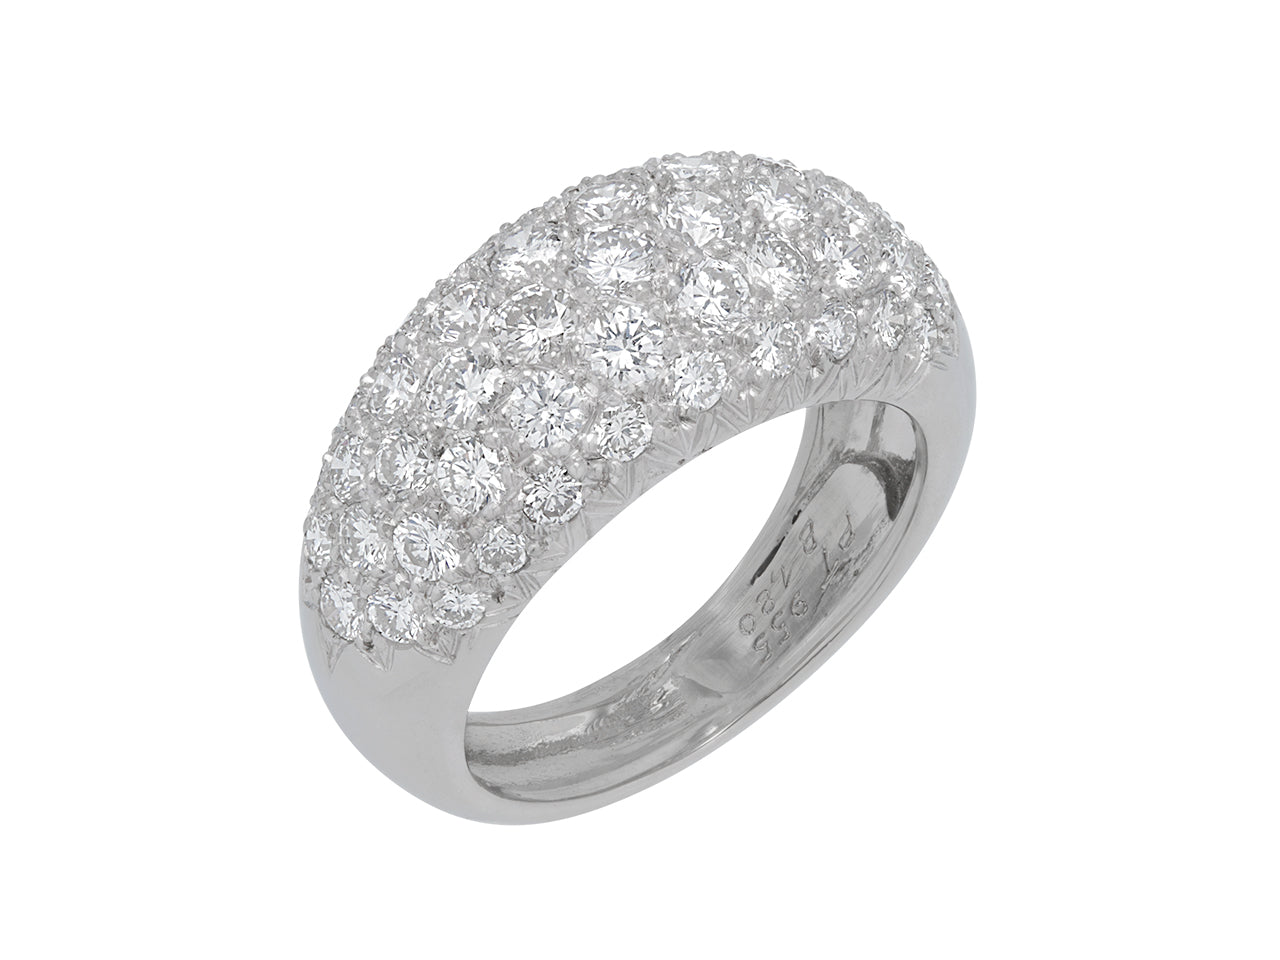 Boule Ring in Platinum, French